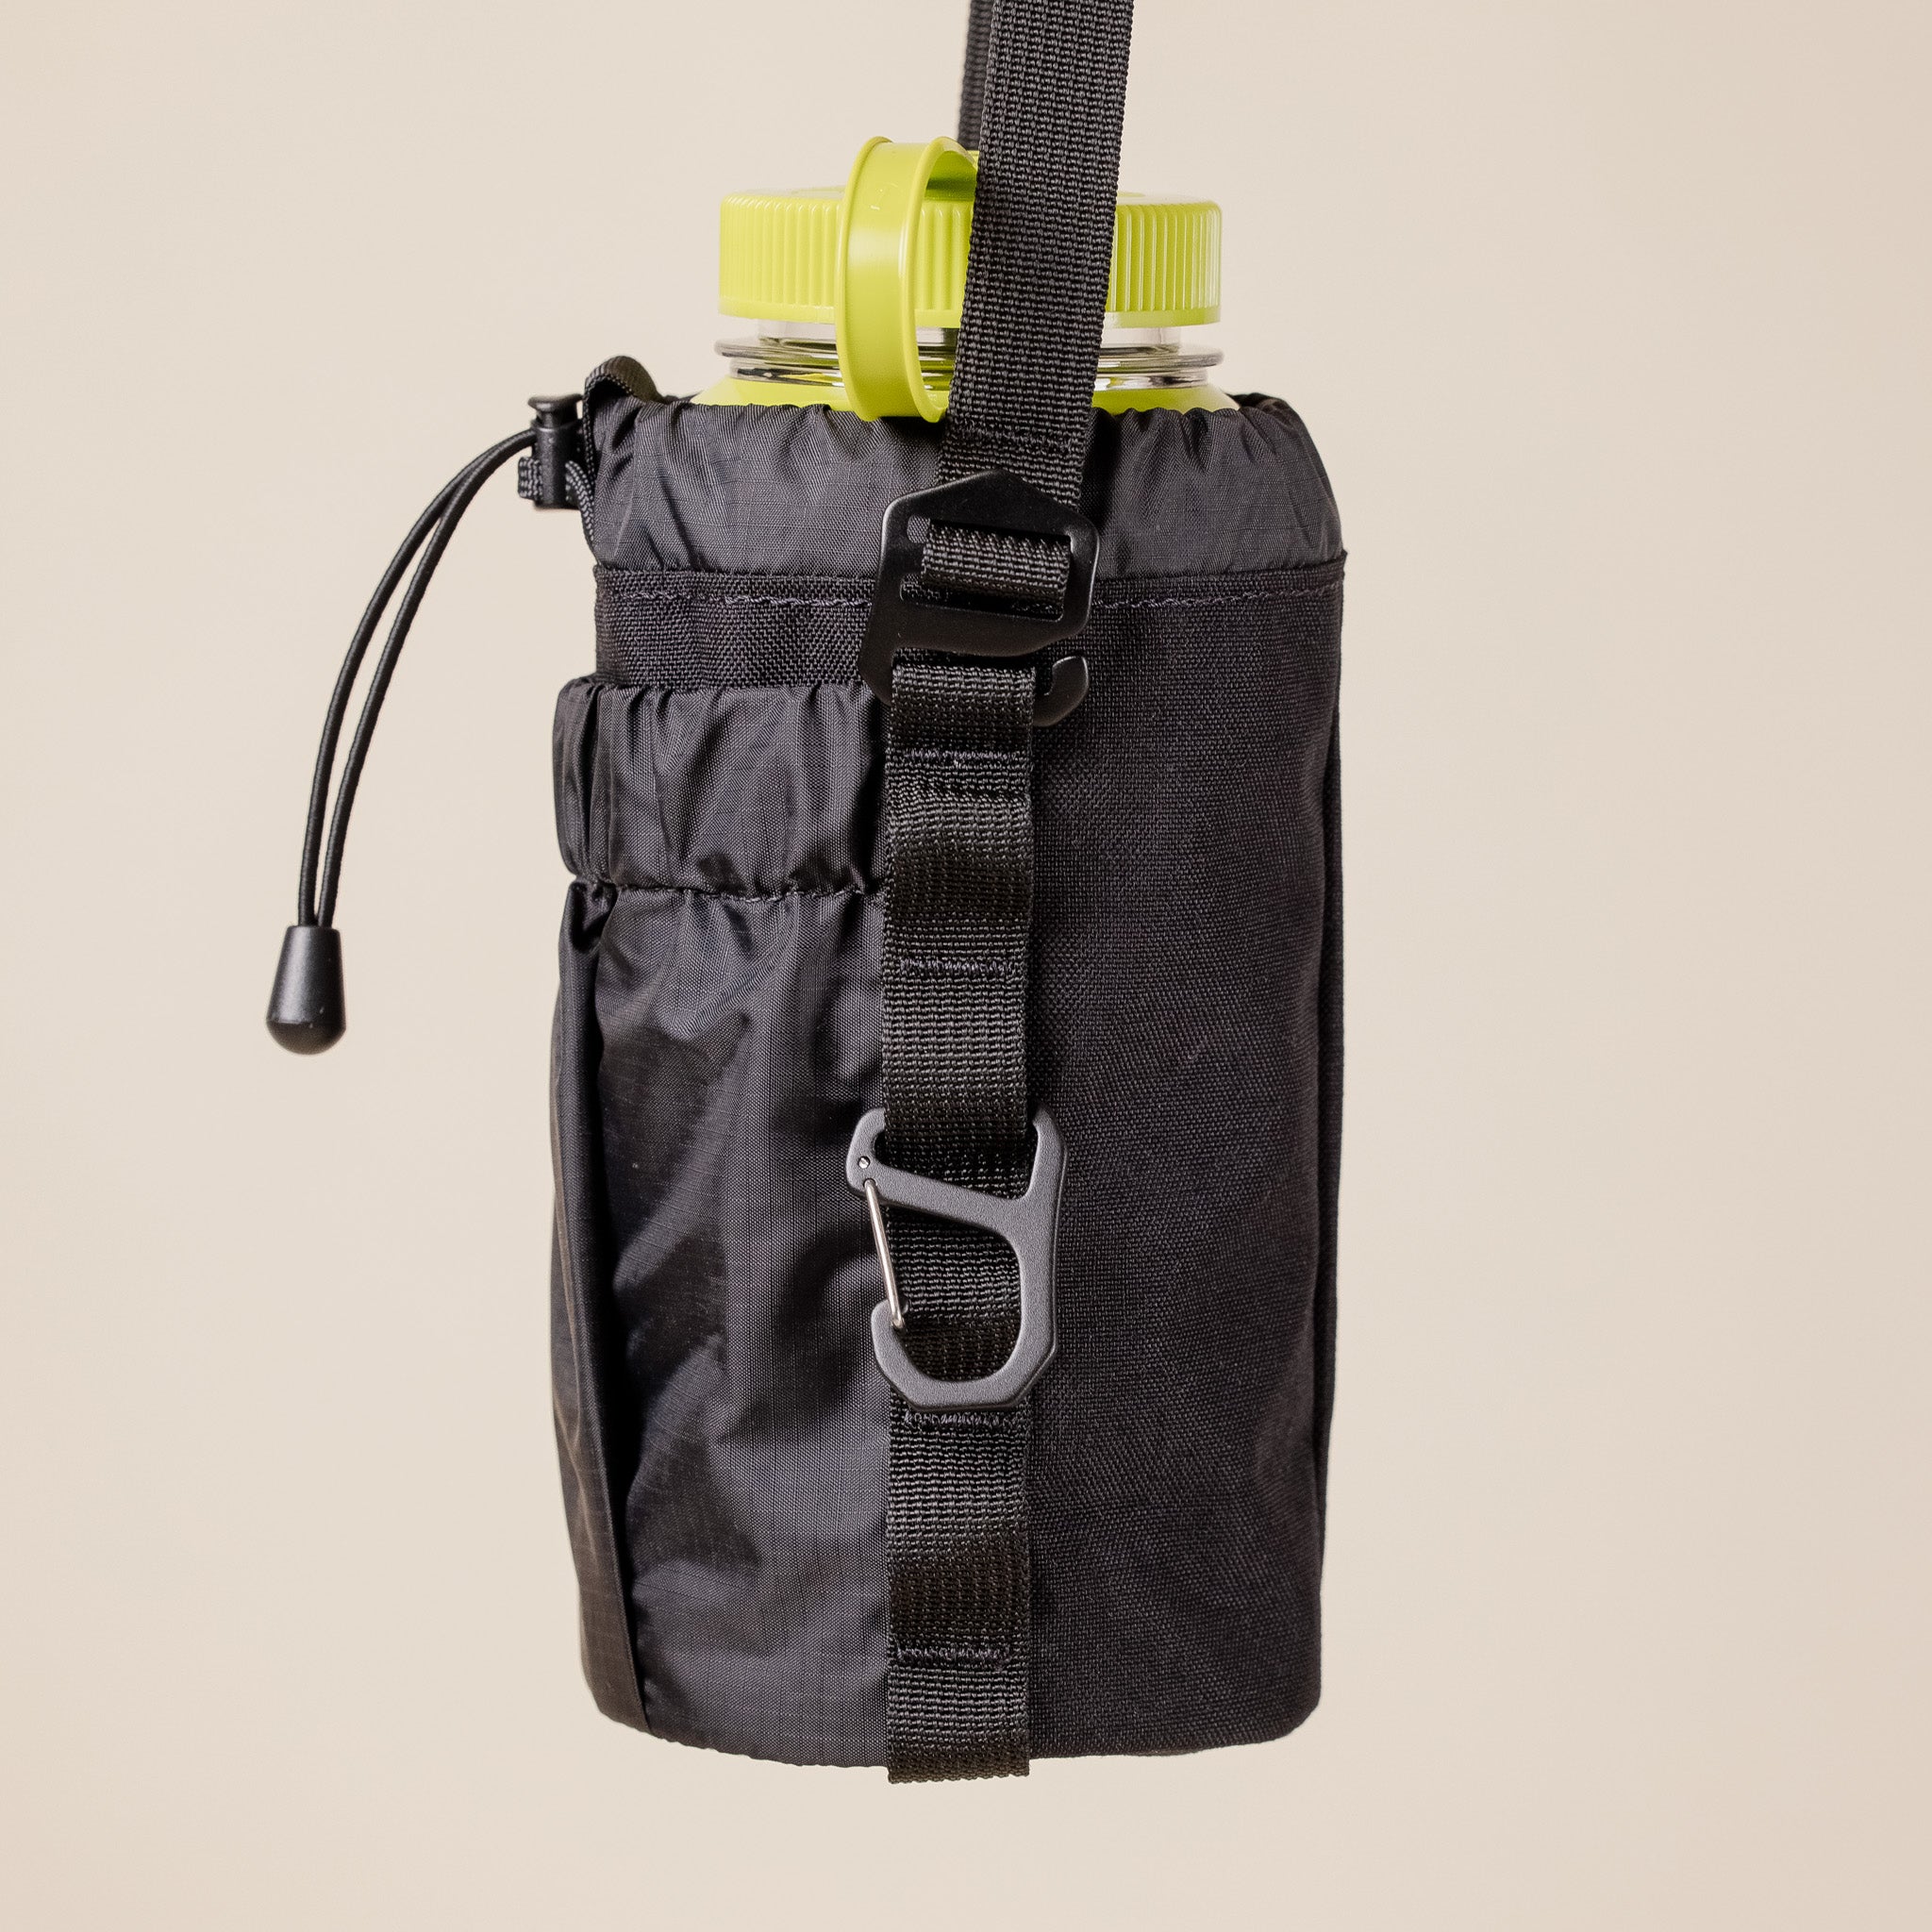 This Thing - 1ltr Nalgene Bottle Bag - Triple Black This Thing Of Ours